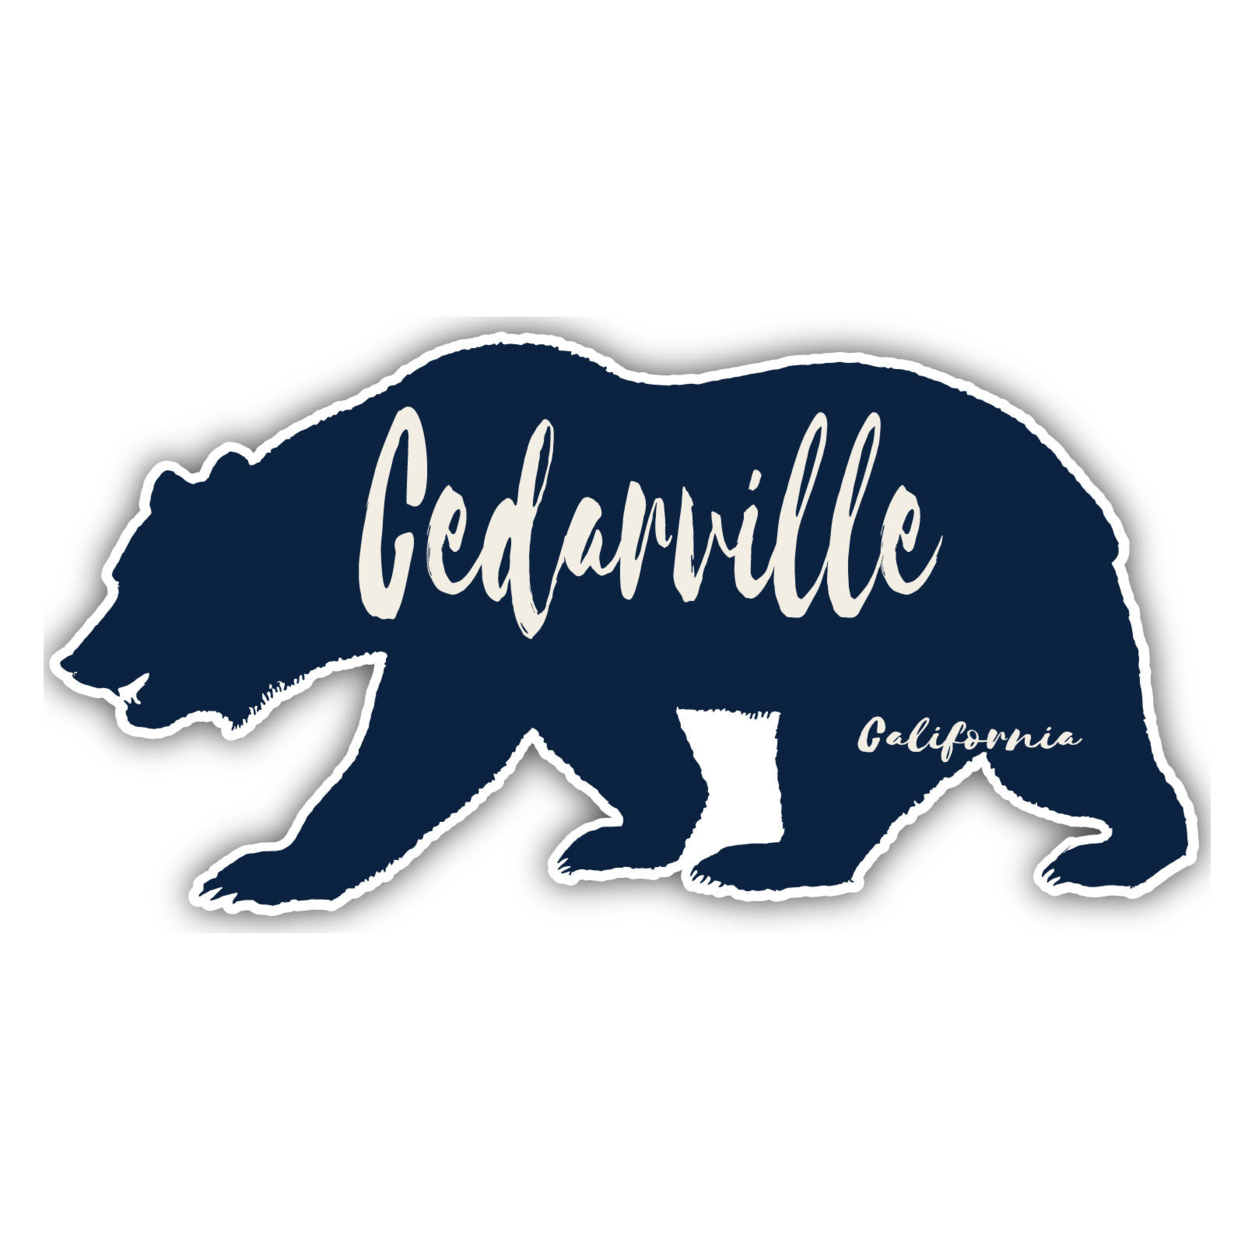 Cedarville California Souvenir Decorative Stickers (Choose Theme And Size) - 4-Pack, 2-Inch, Bear